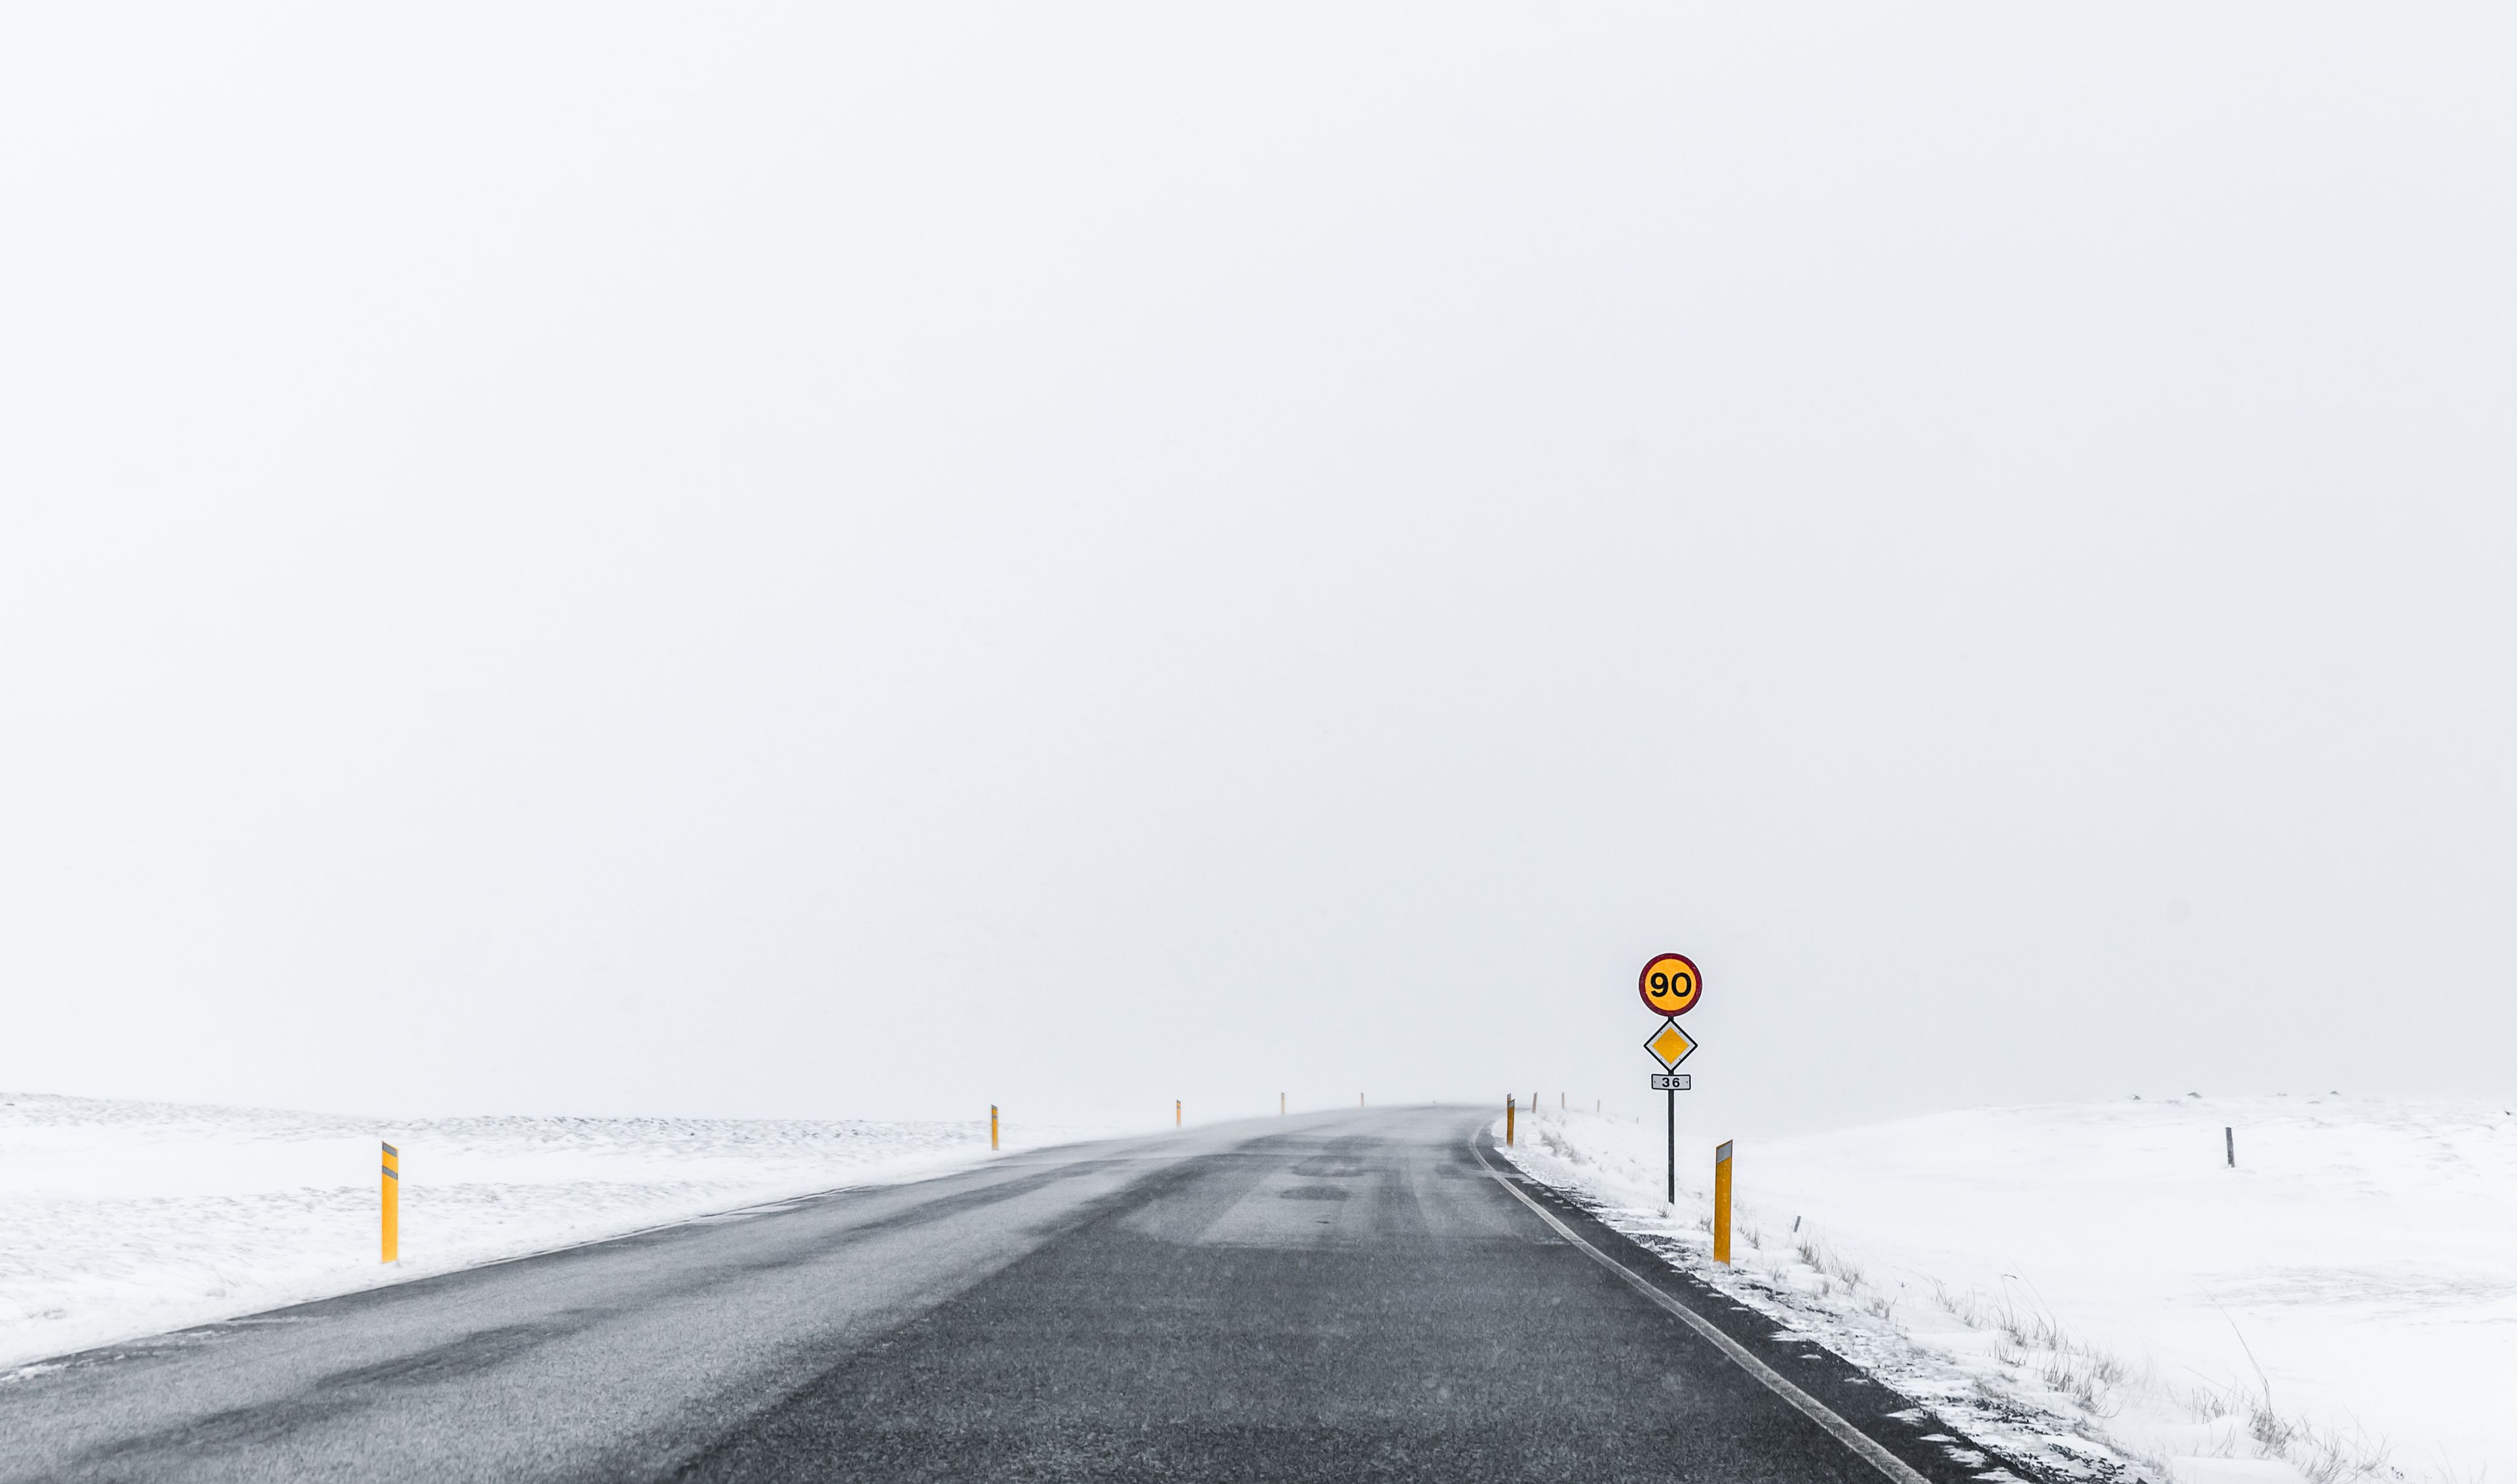 A paved snowy road in Iceland, marked by a speeding sign